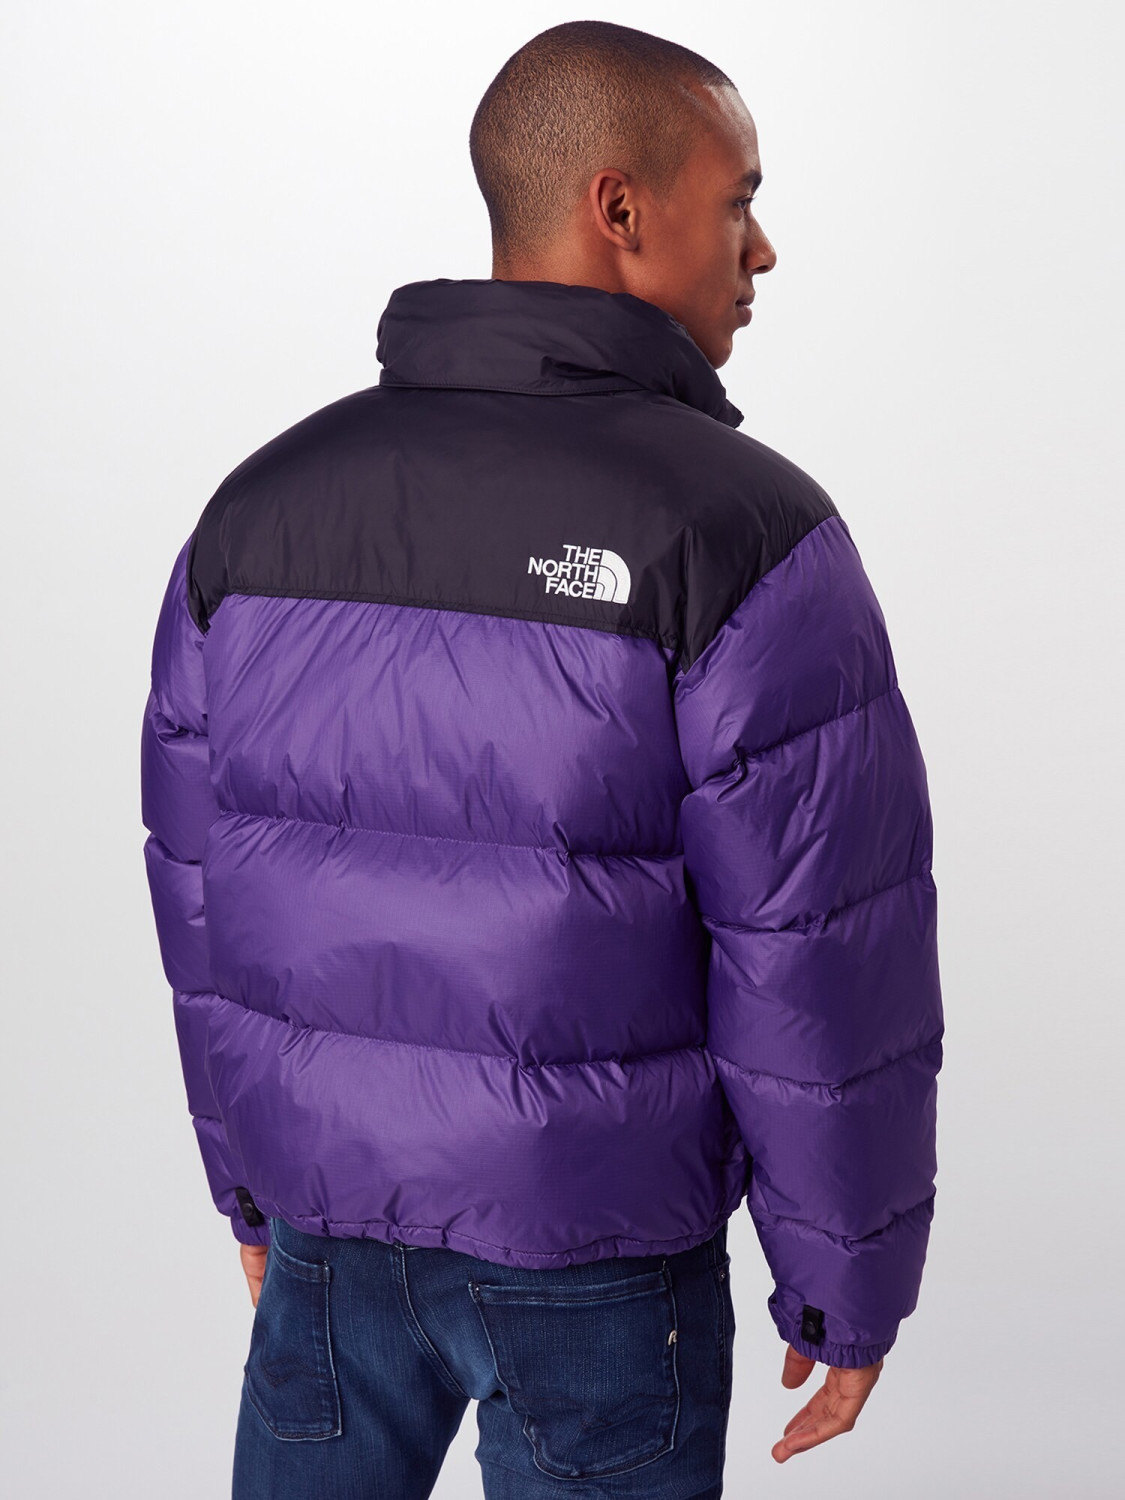 Buy The North Face 1996 Retro Nuptse Jacket Purple From £315 00 Today Best Deals On Uk